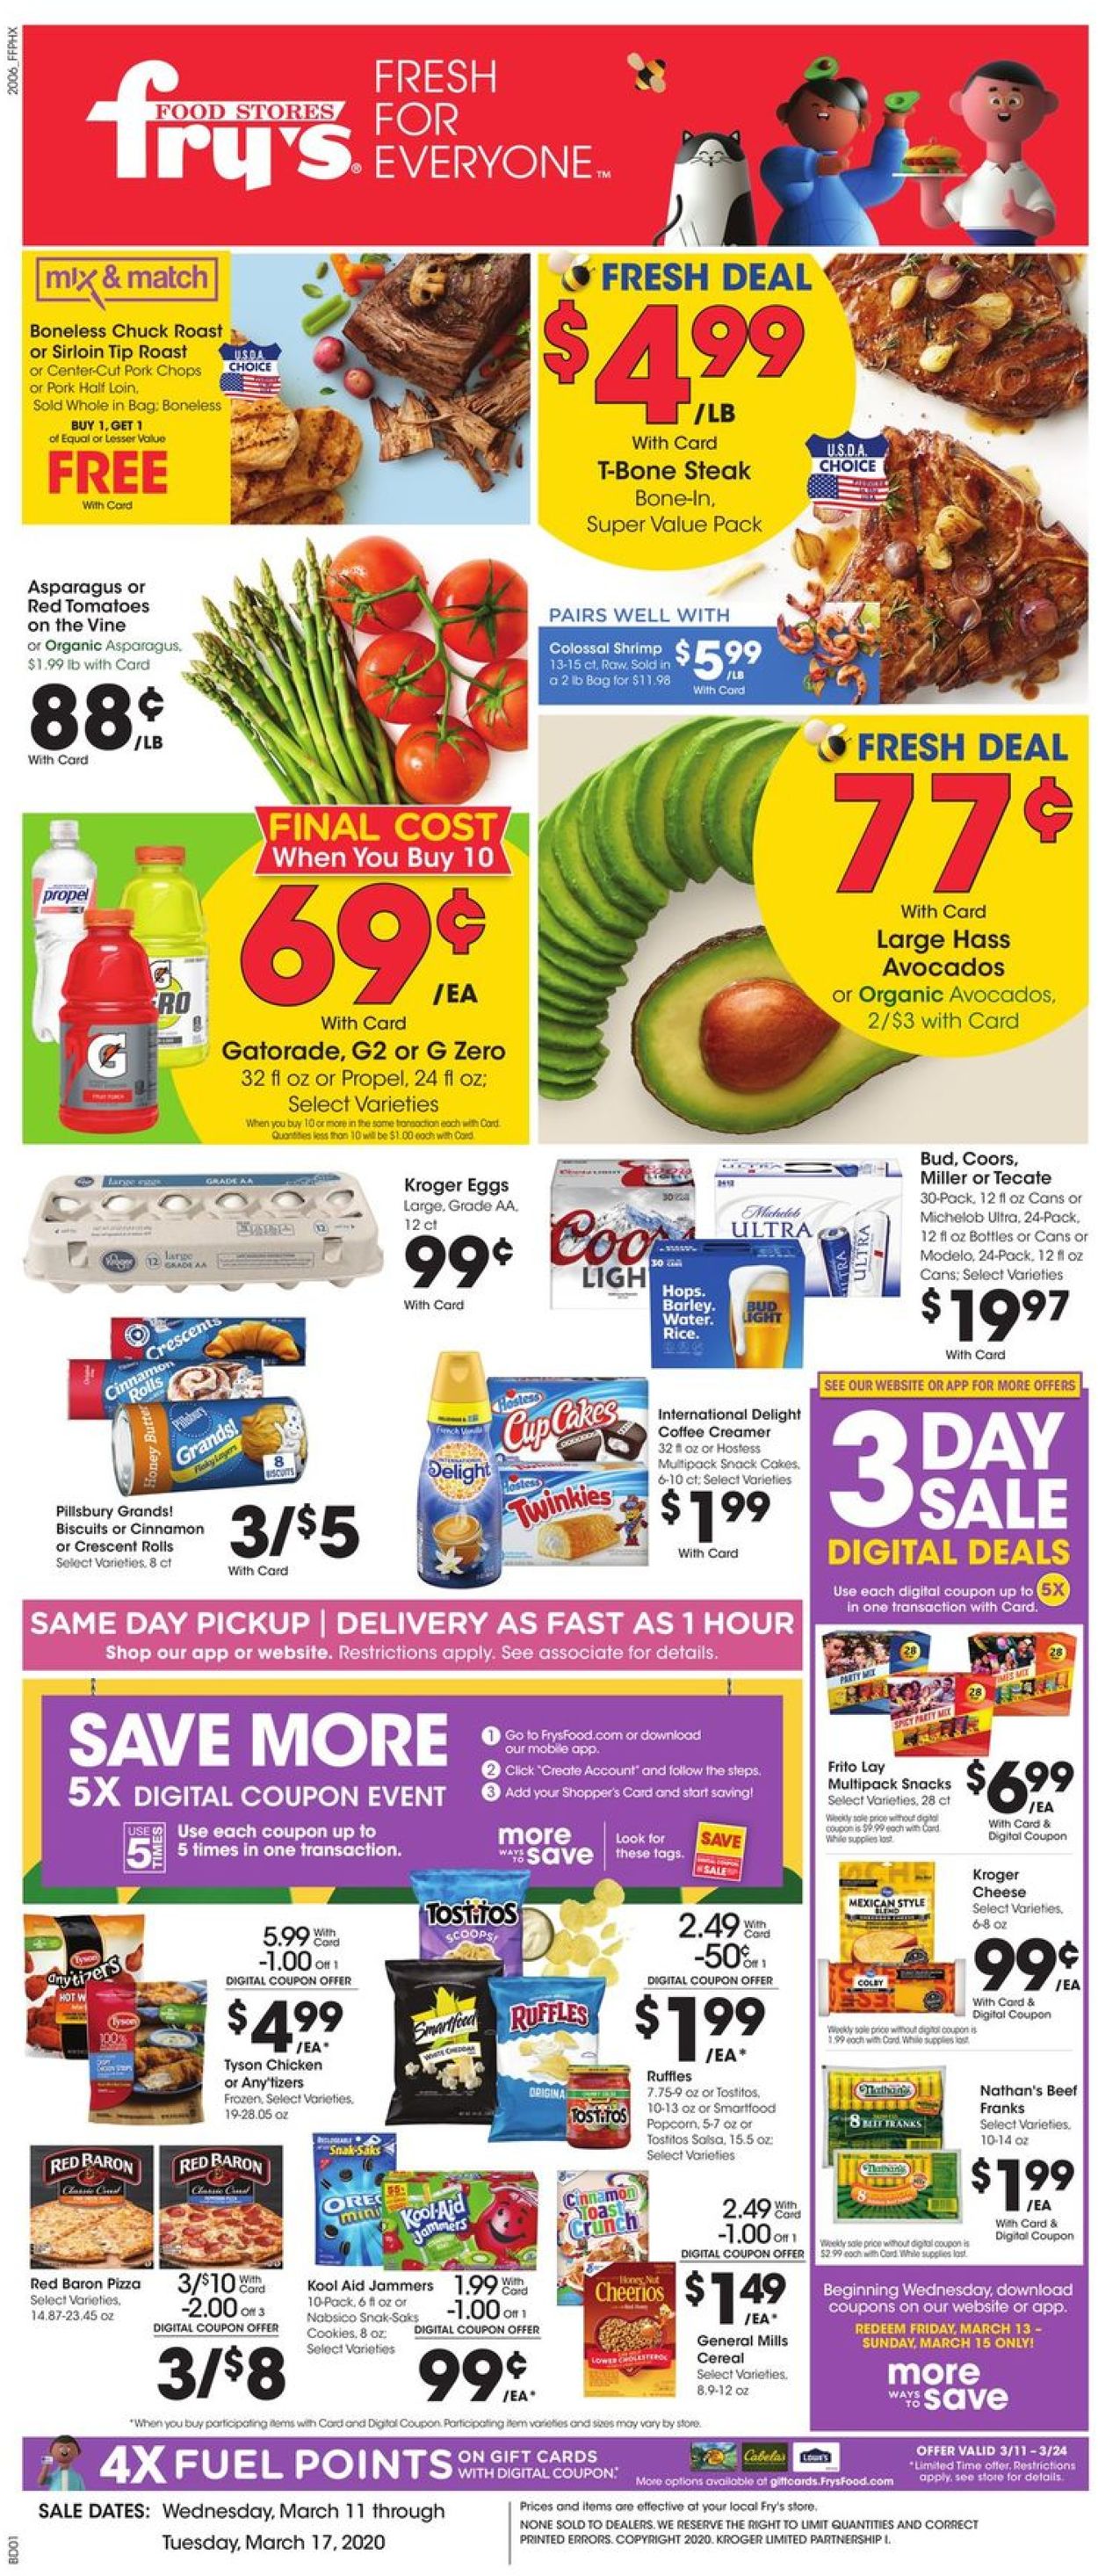 Fry’s Current weekly ad 03/11 - 03/17/2020 - frequent-ads.com